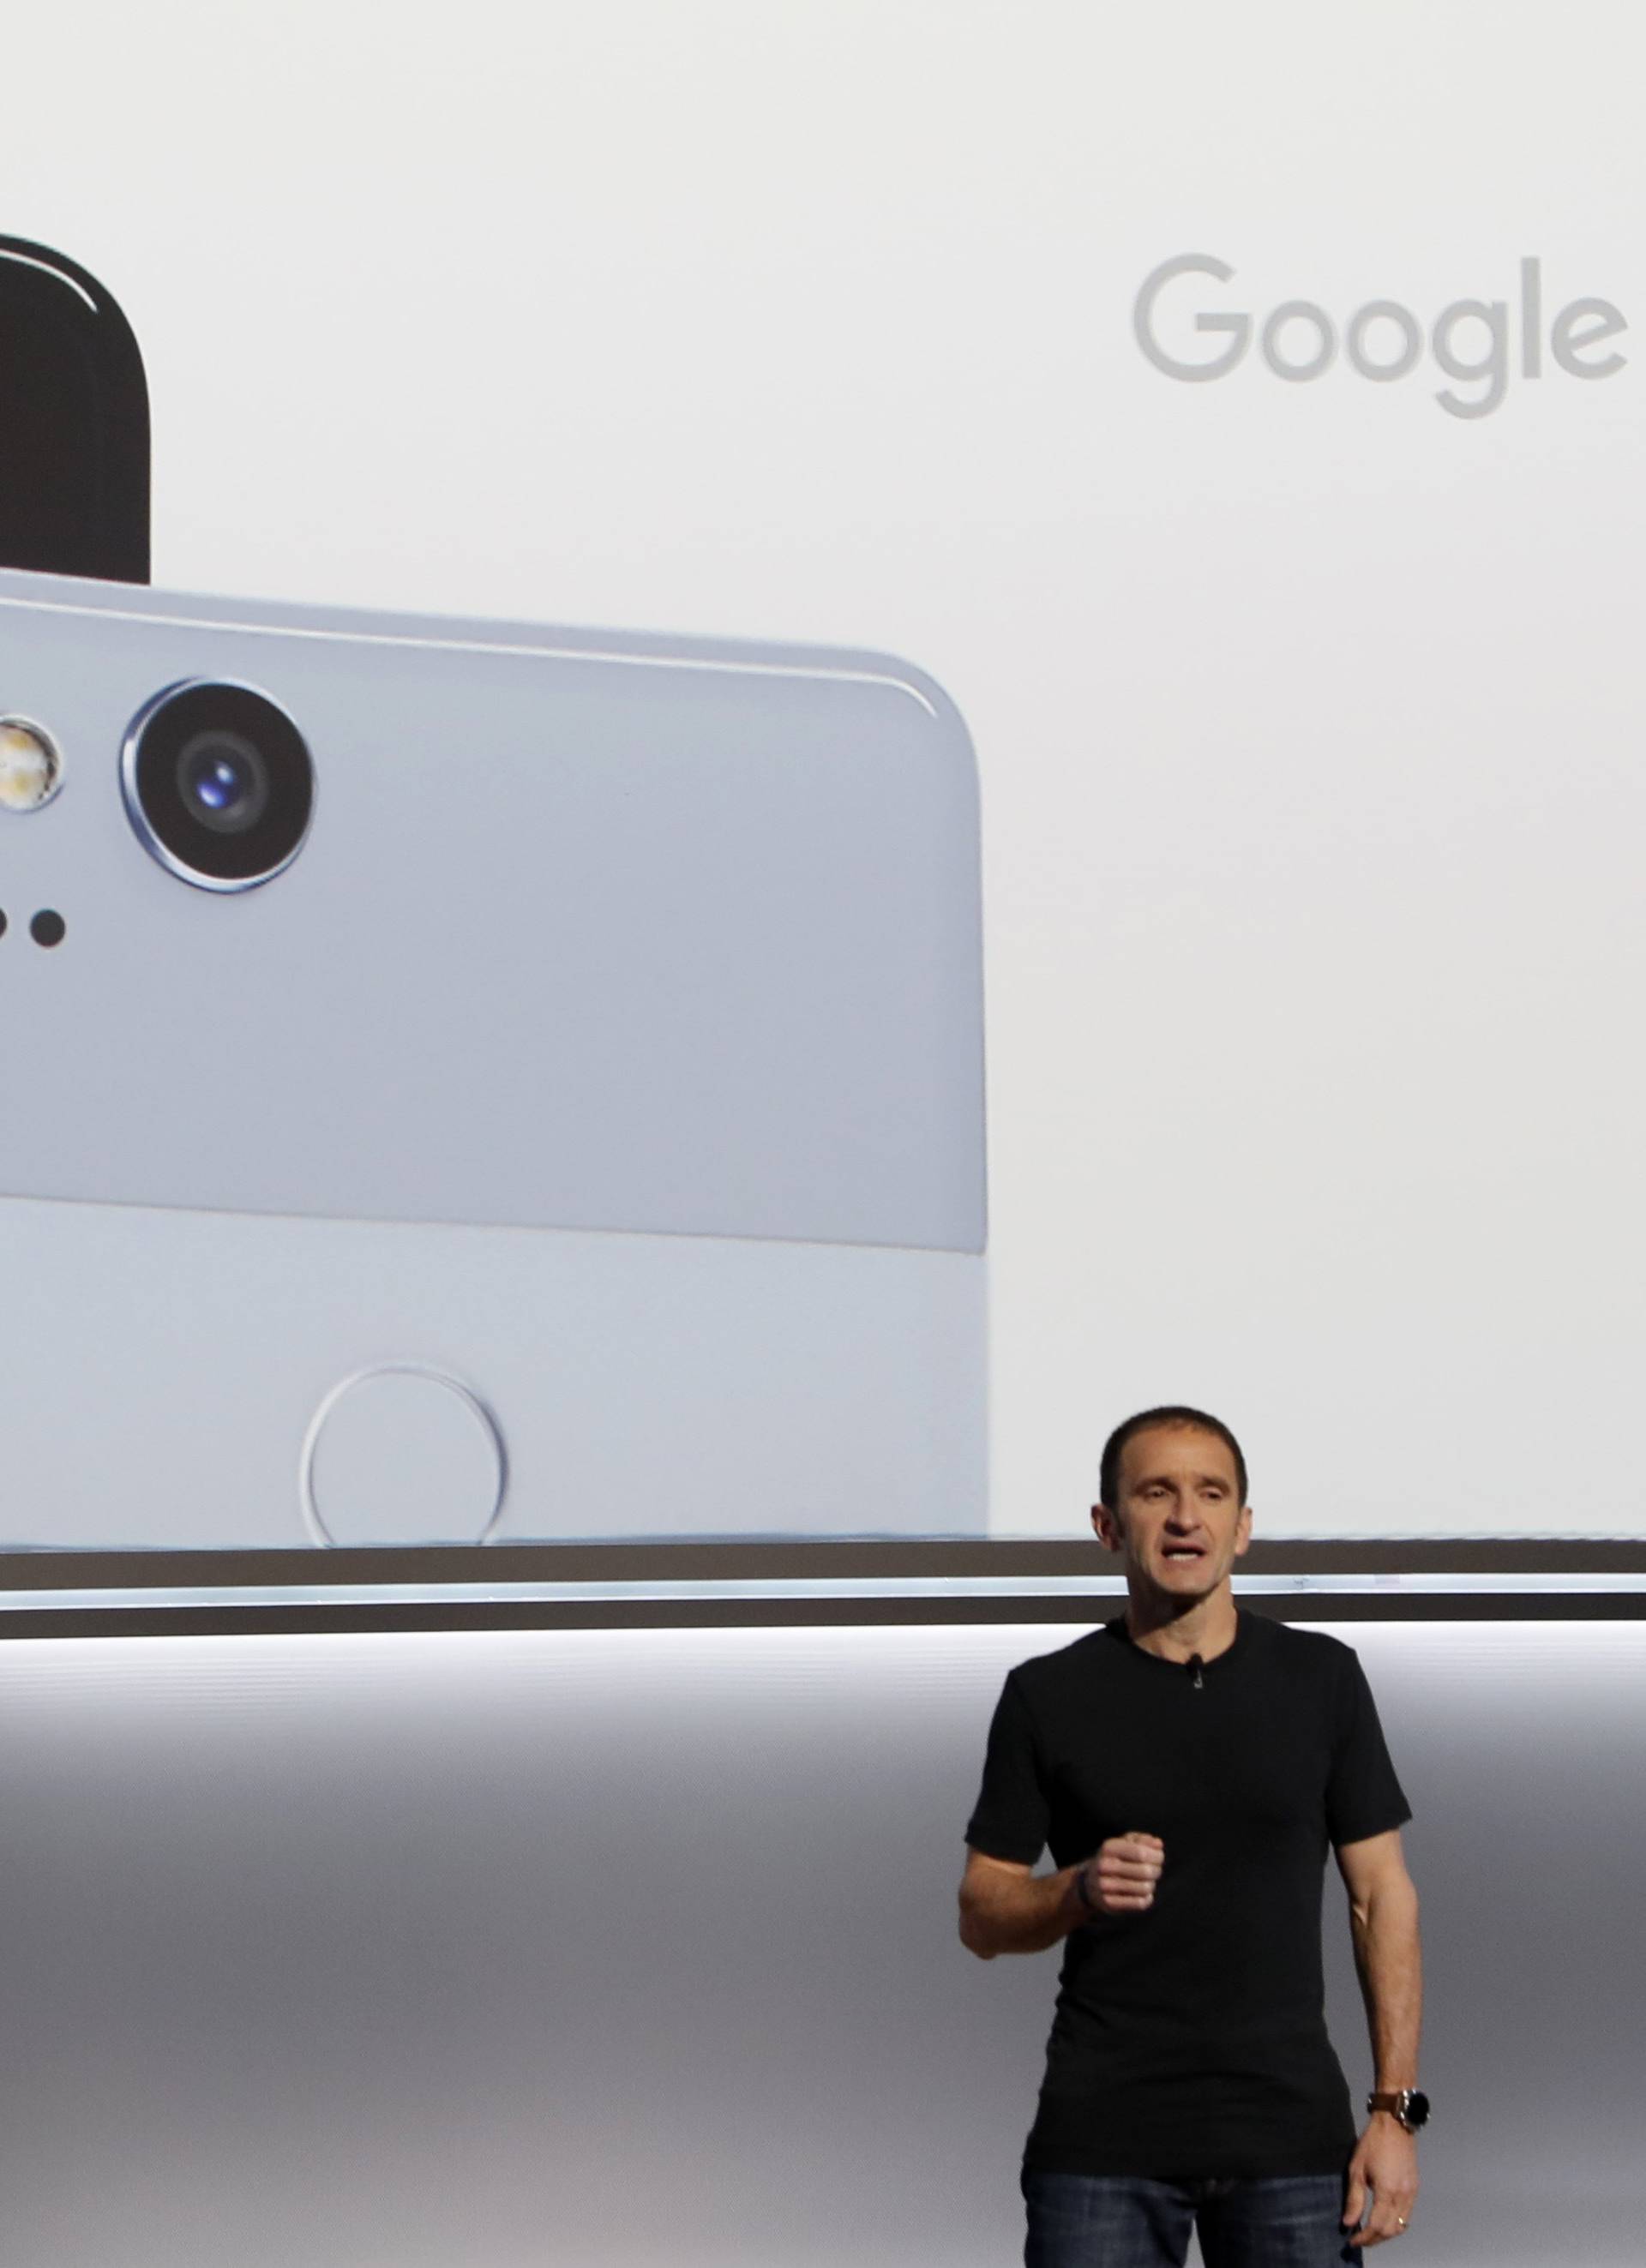 Google's Queiroz speaks during a launch event in San Francisco